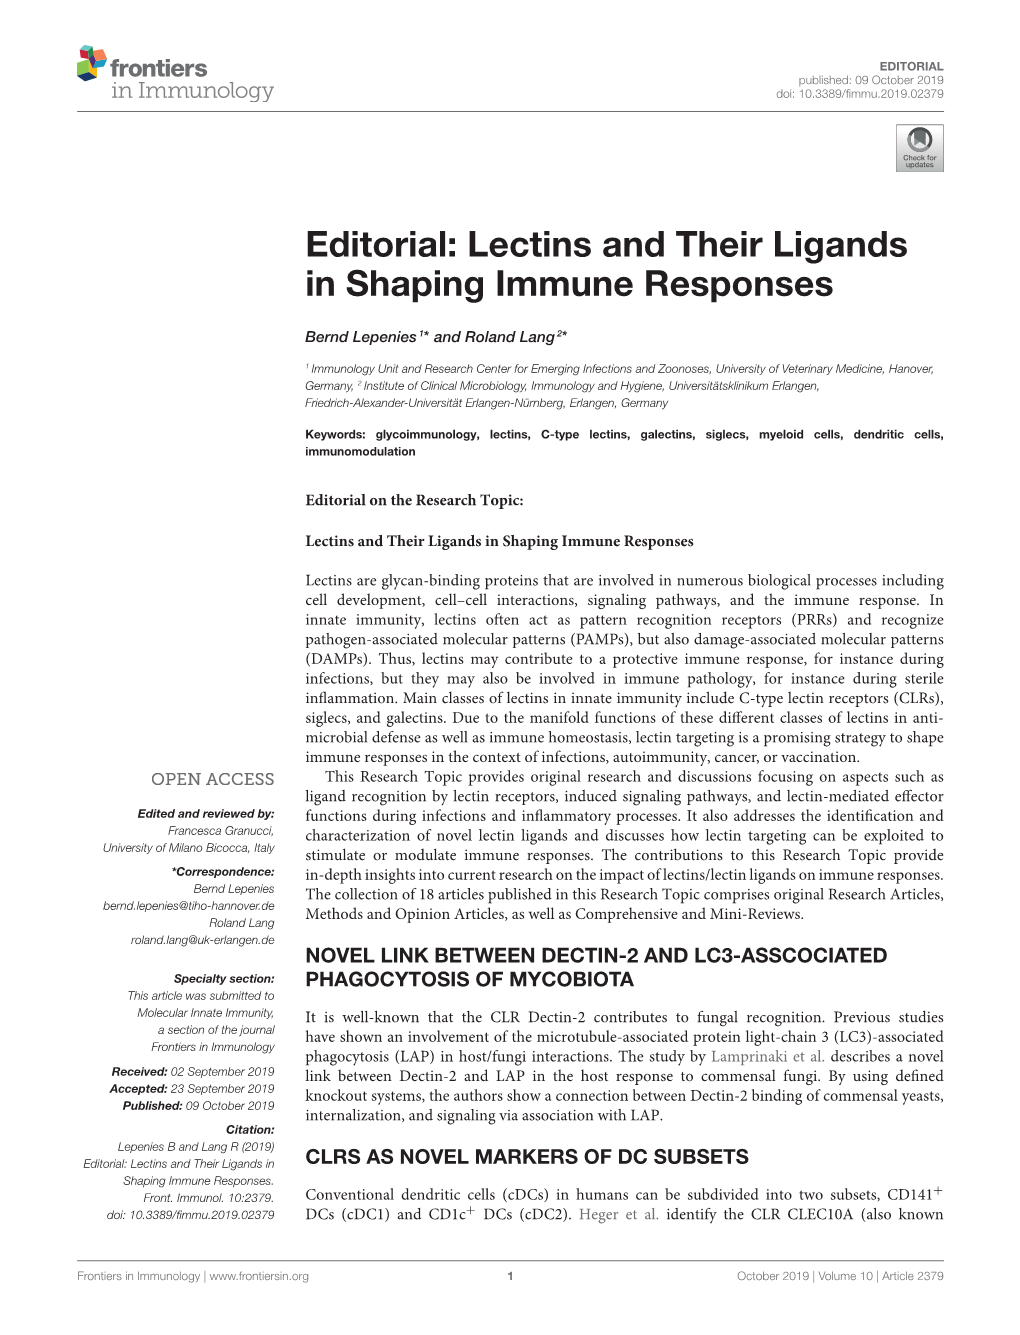 Lectins and Their Ligands in Shaping Immune Responses